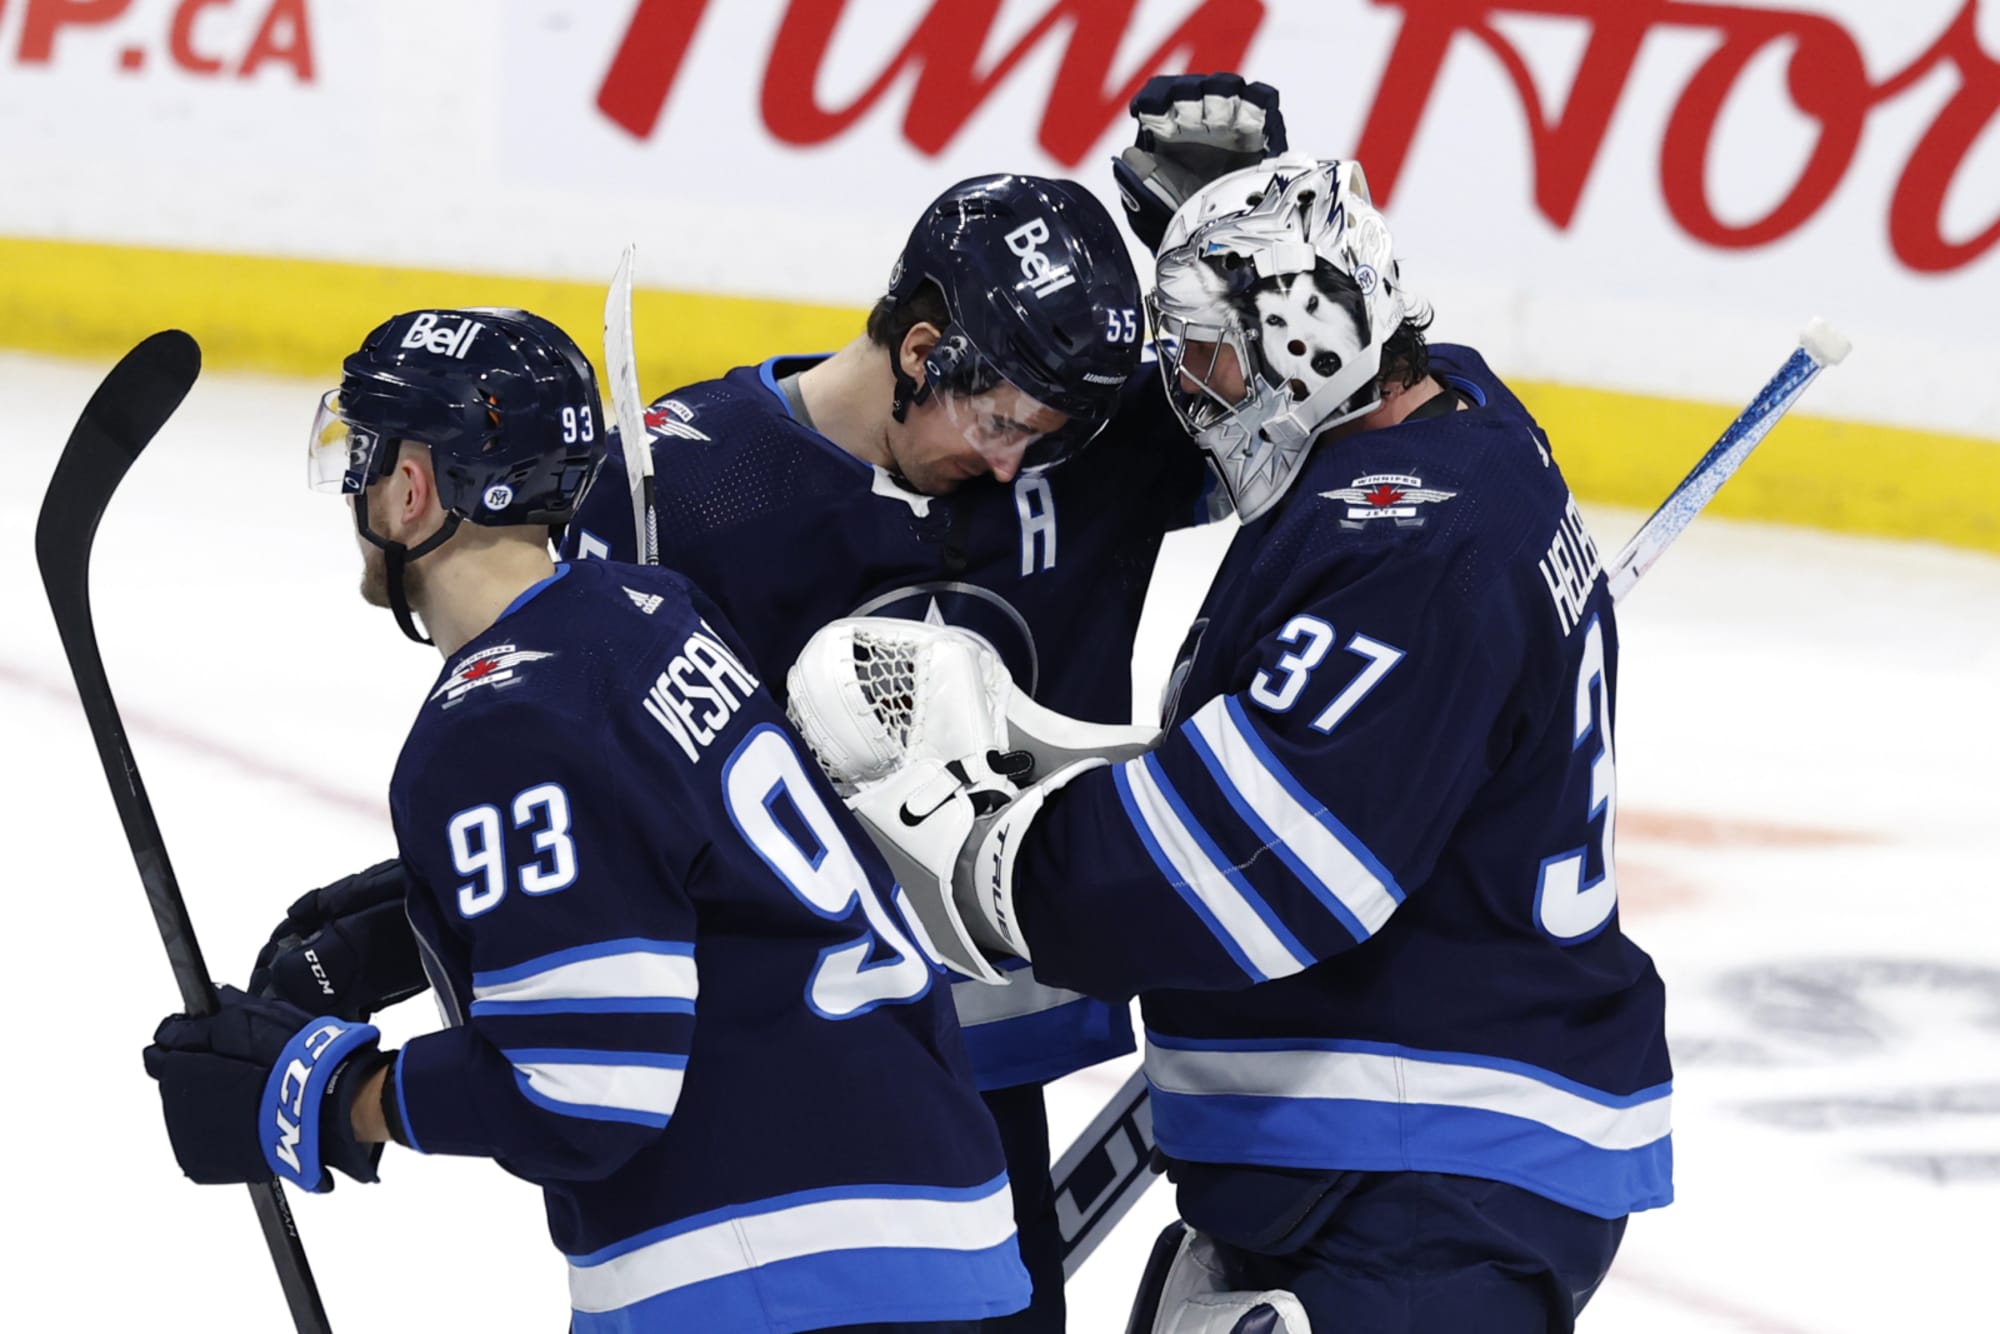 Frustrated Patrik Laine wants to be on top line, play with high